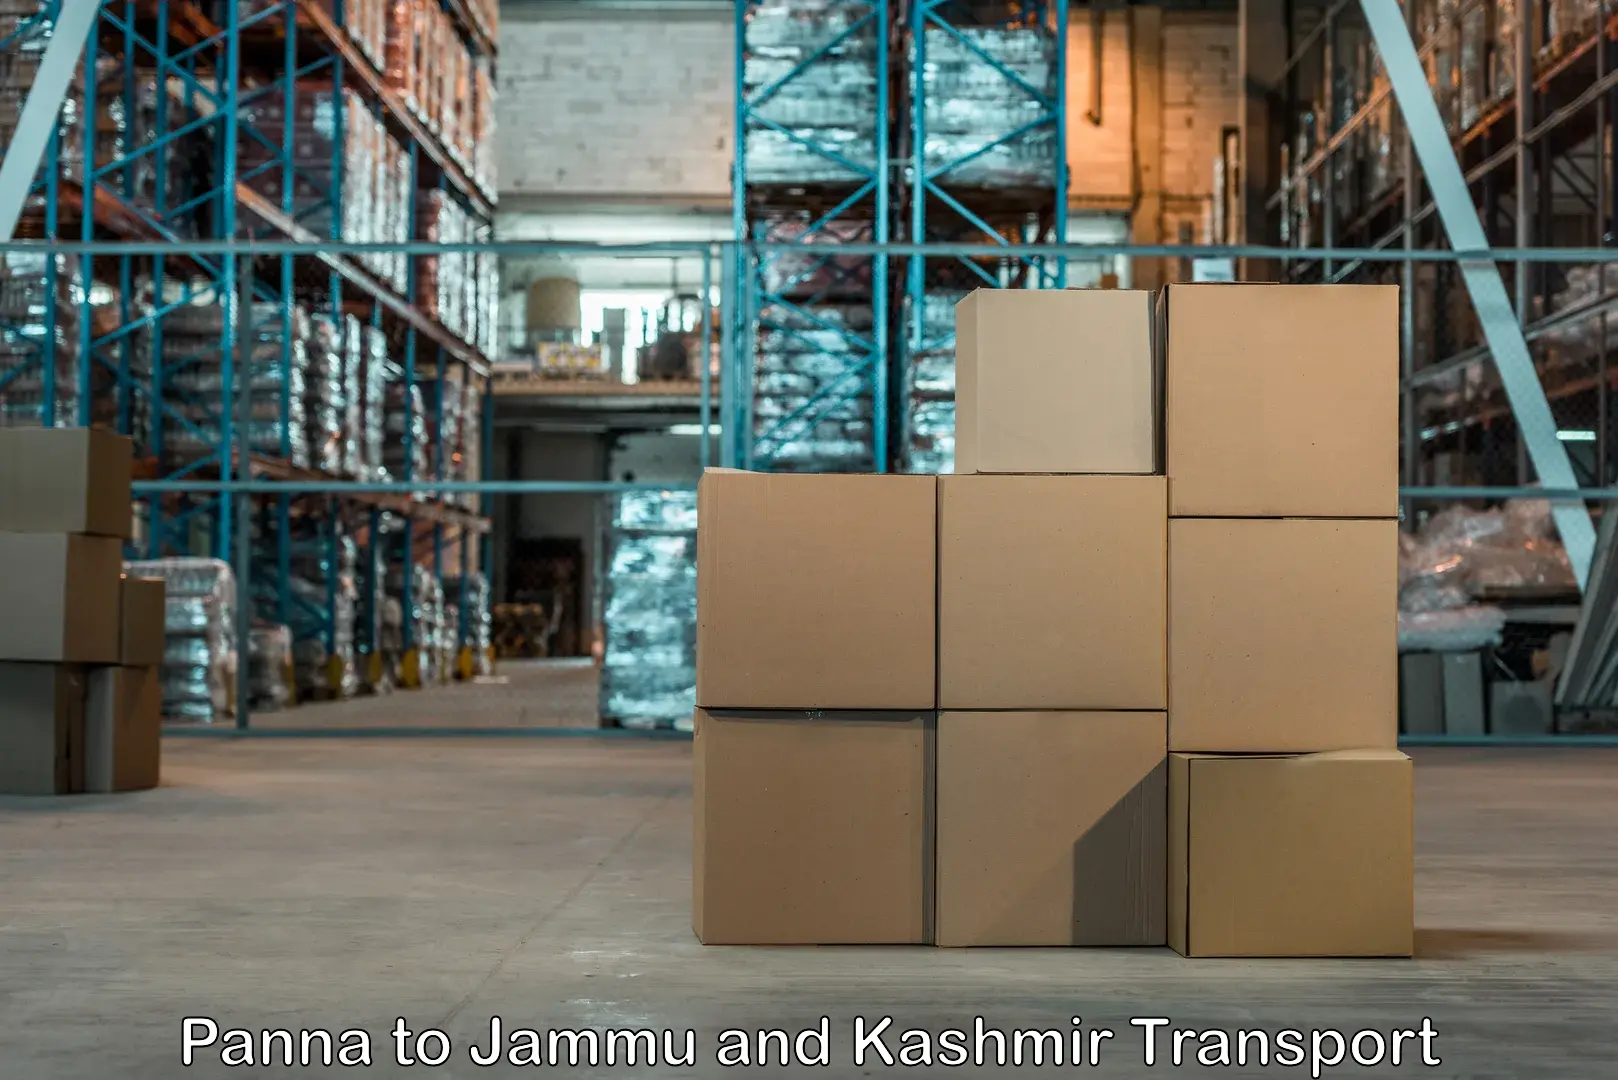 Truck transport companies in India Panna to Jammu and Kashmir